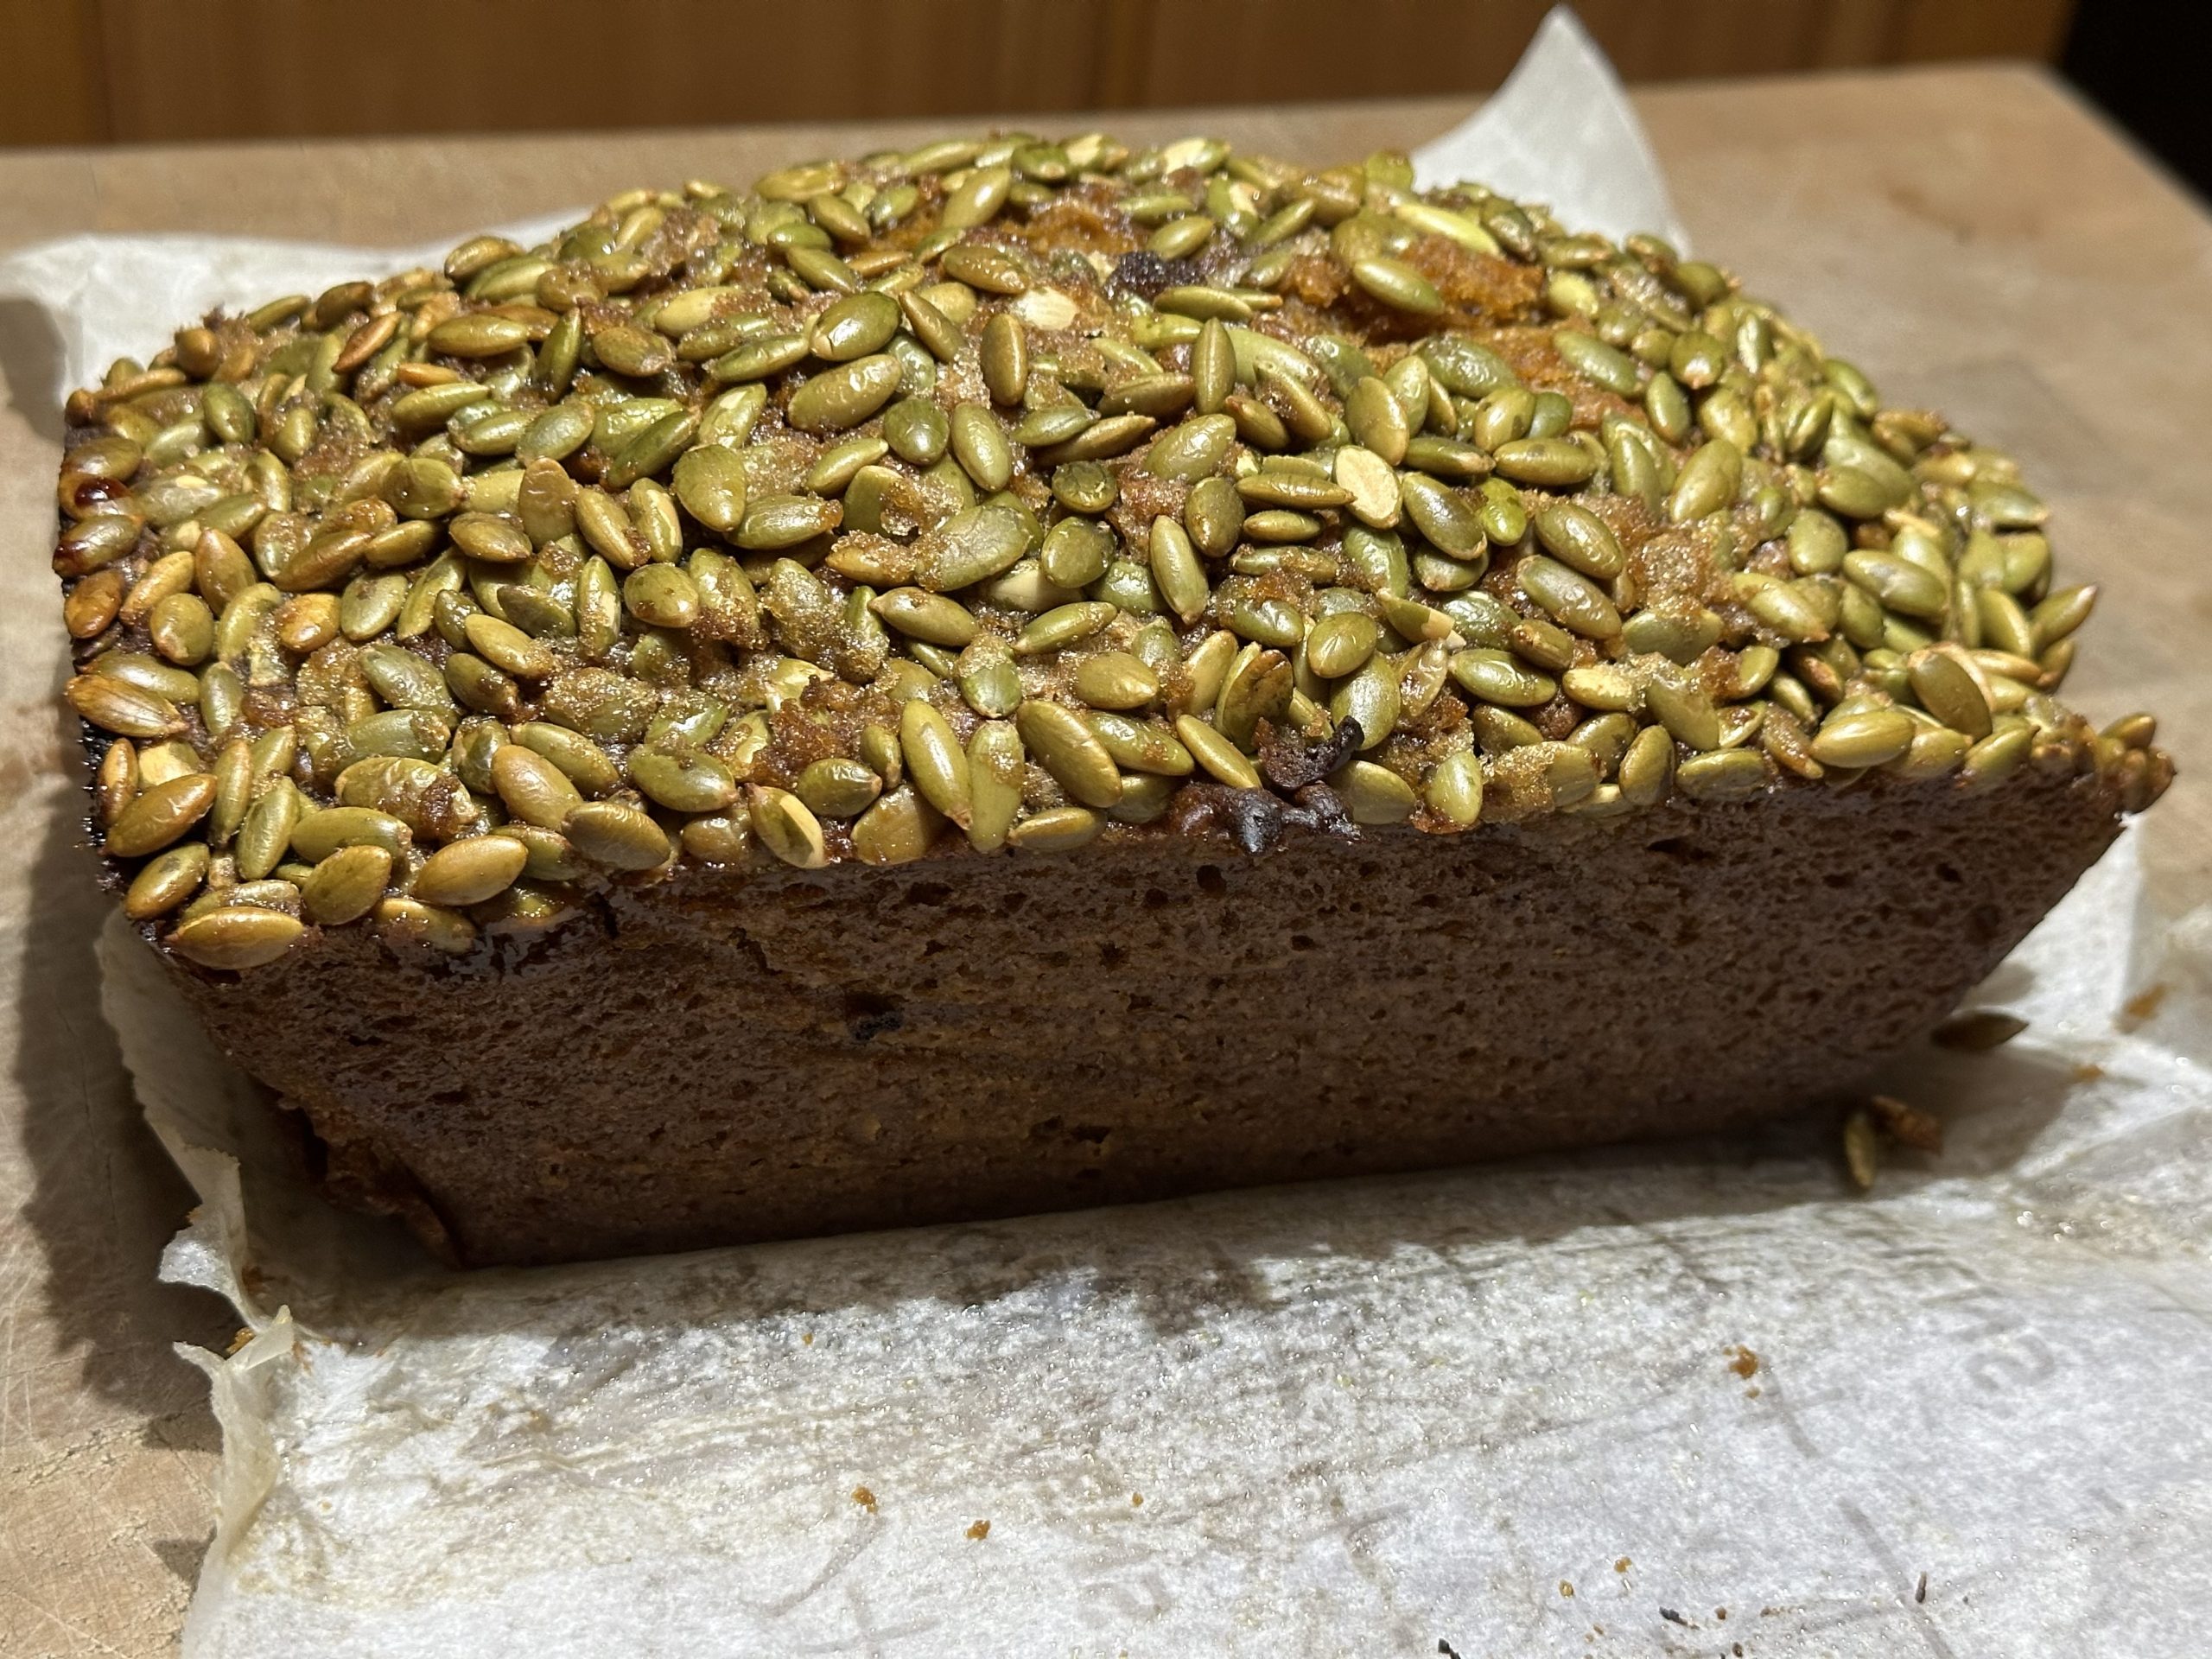 A loaf of cooked pumpkin bread with pepitas on top.